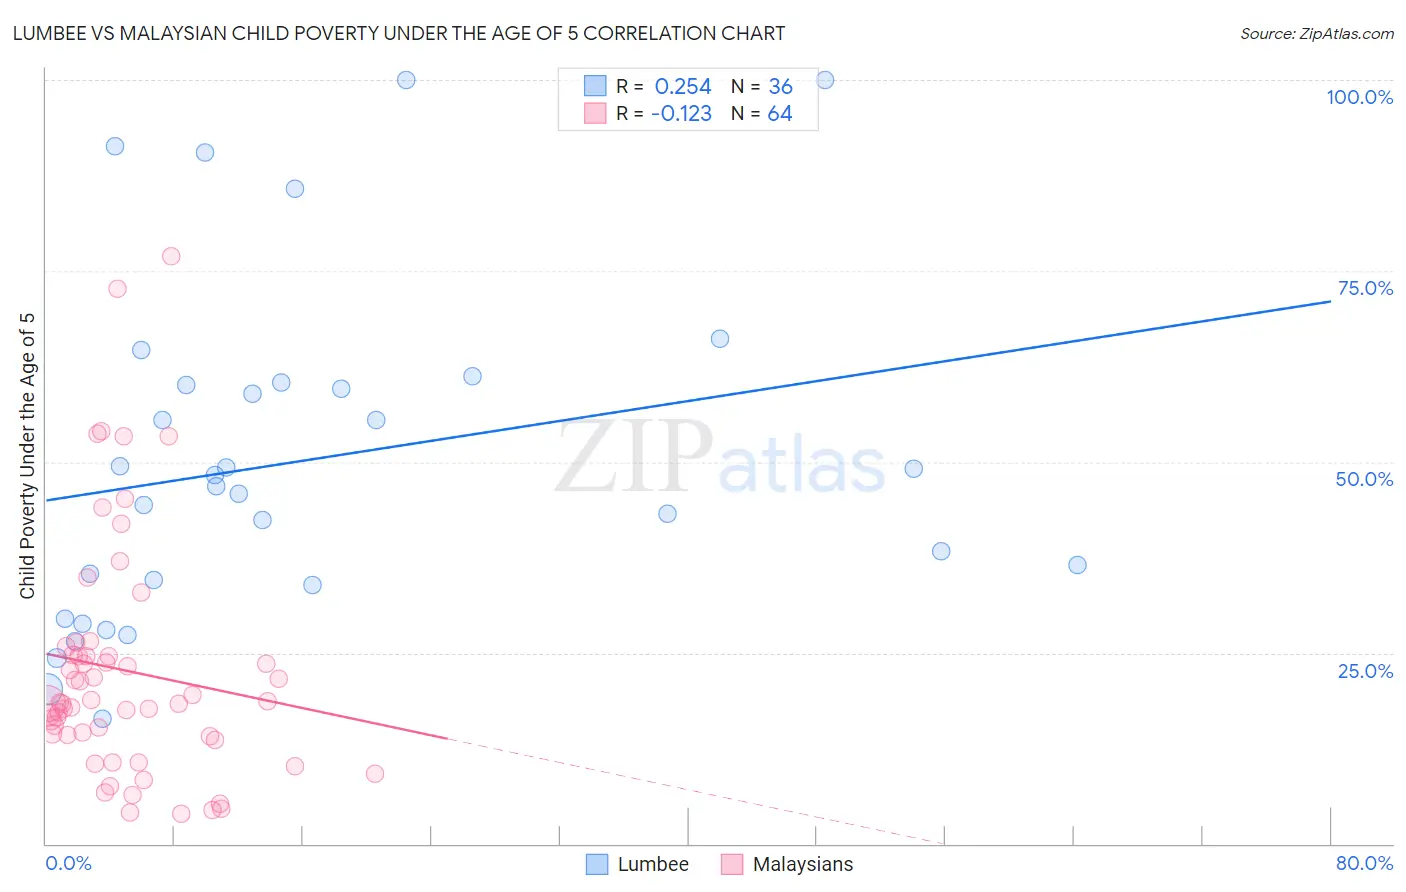 Lumbee vs Malaysian Child Poverty Under the Age of 5